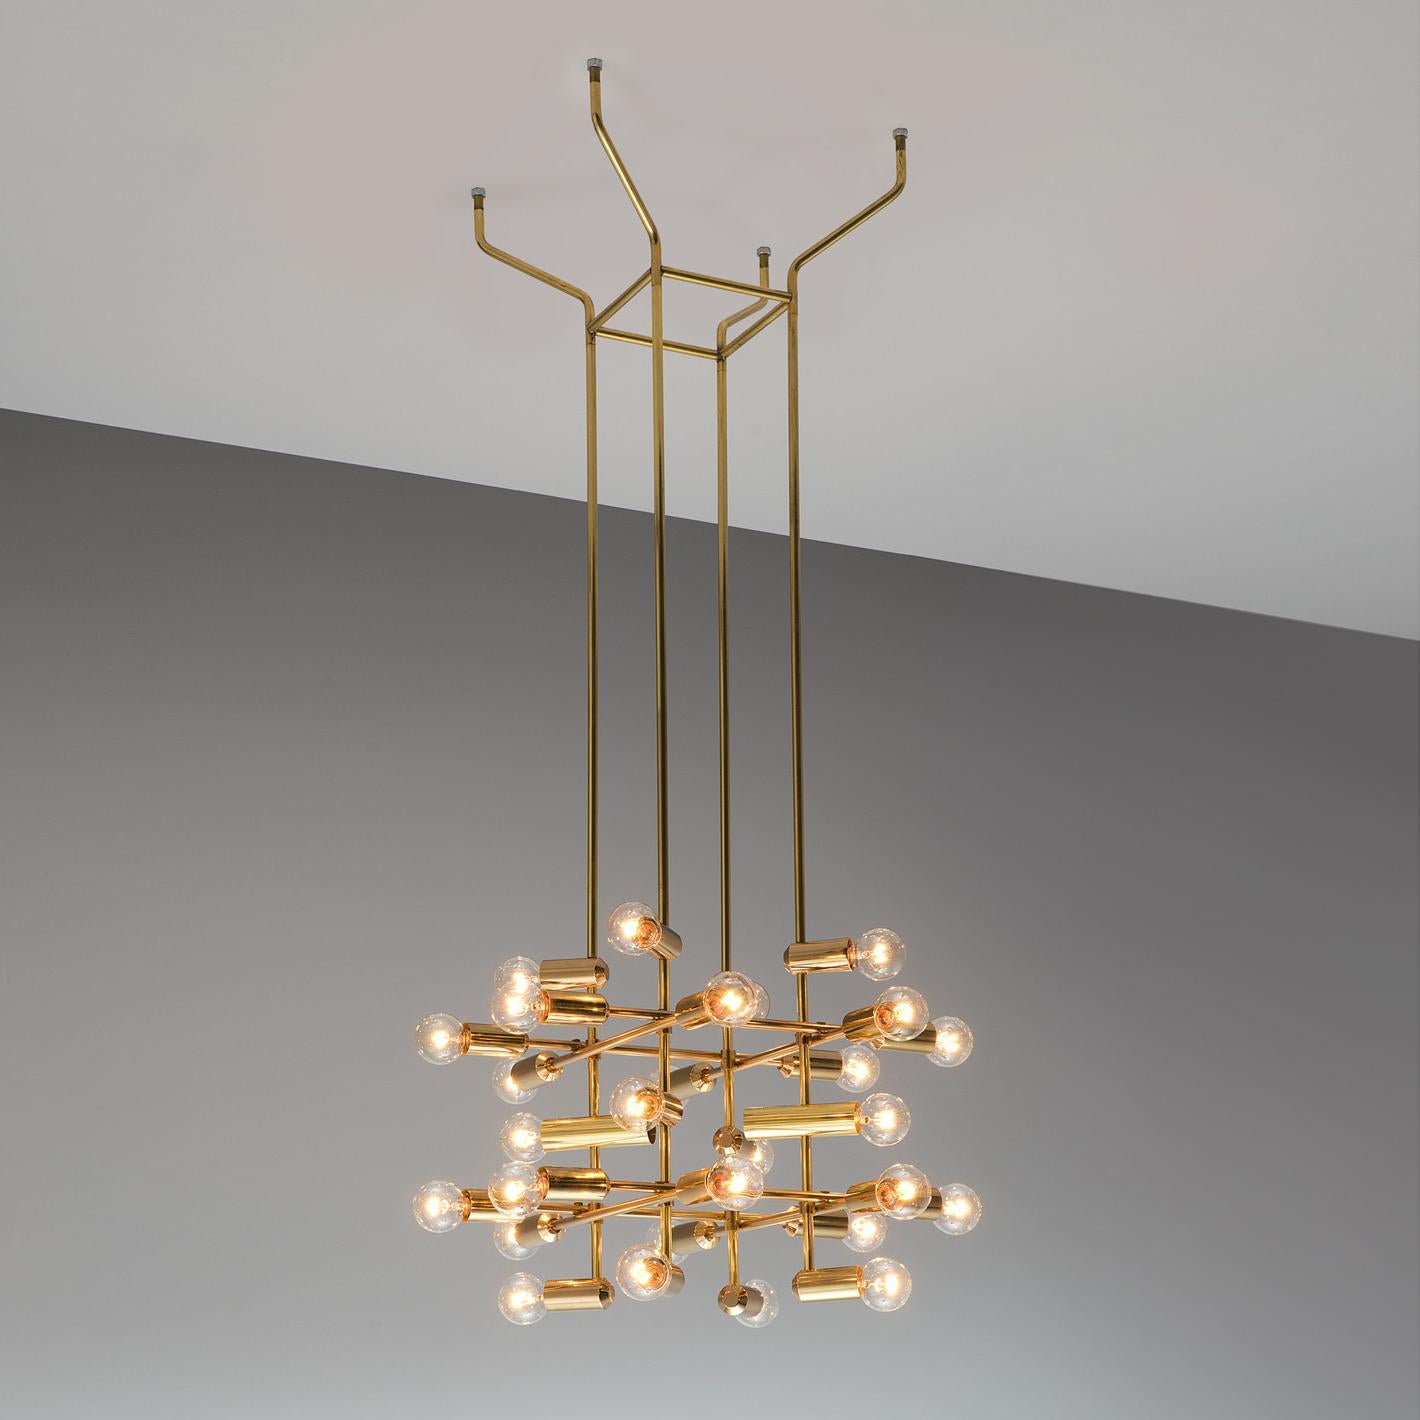 Chandelier in brass, Switzerland, 1960s.

This delicate chandelier is Minimalist yet warm. Each light consists of 28 light bulbs that are placed on the ends of brass horizontal beam. The beams form a cross-like pattern that is attached to the